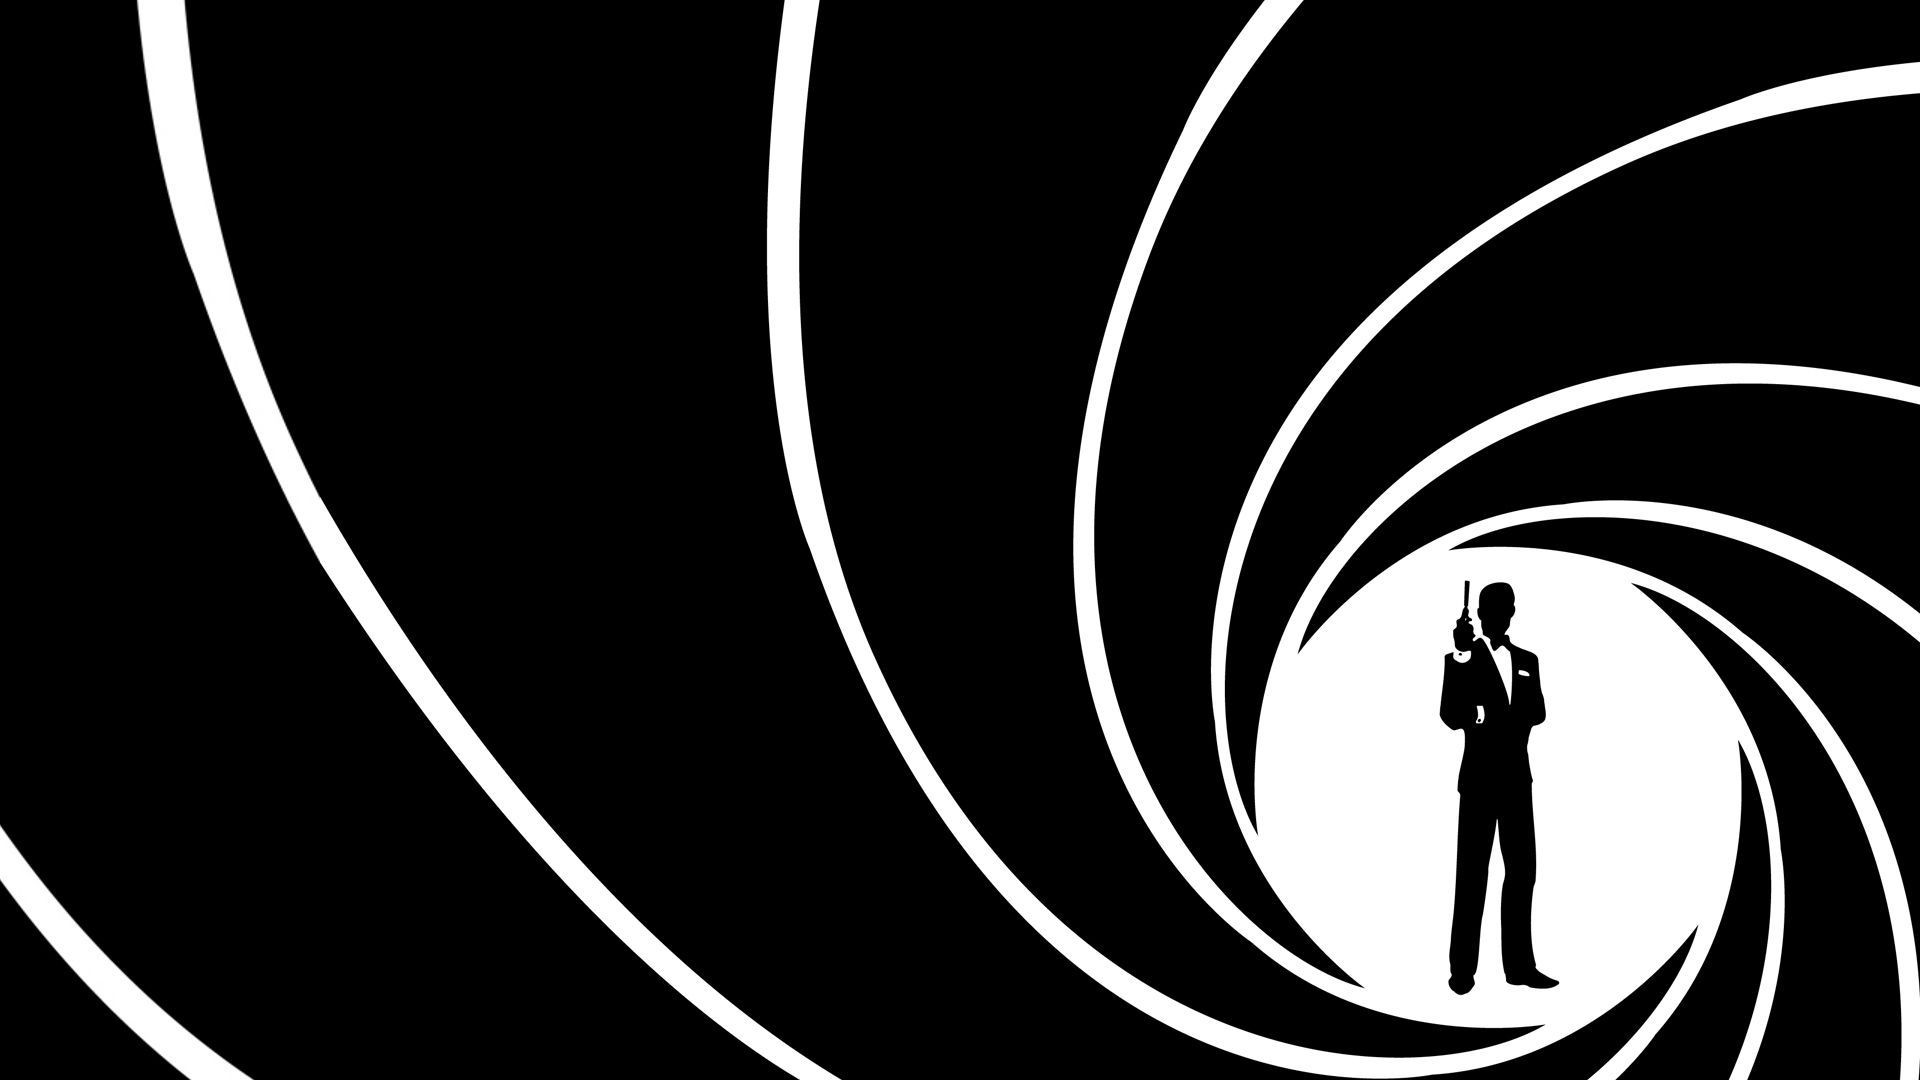 James Bond Screensaver posted by Christopher Tremblay